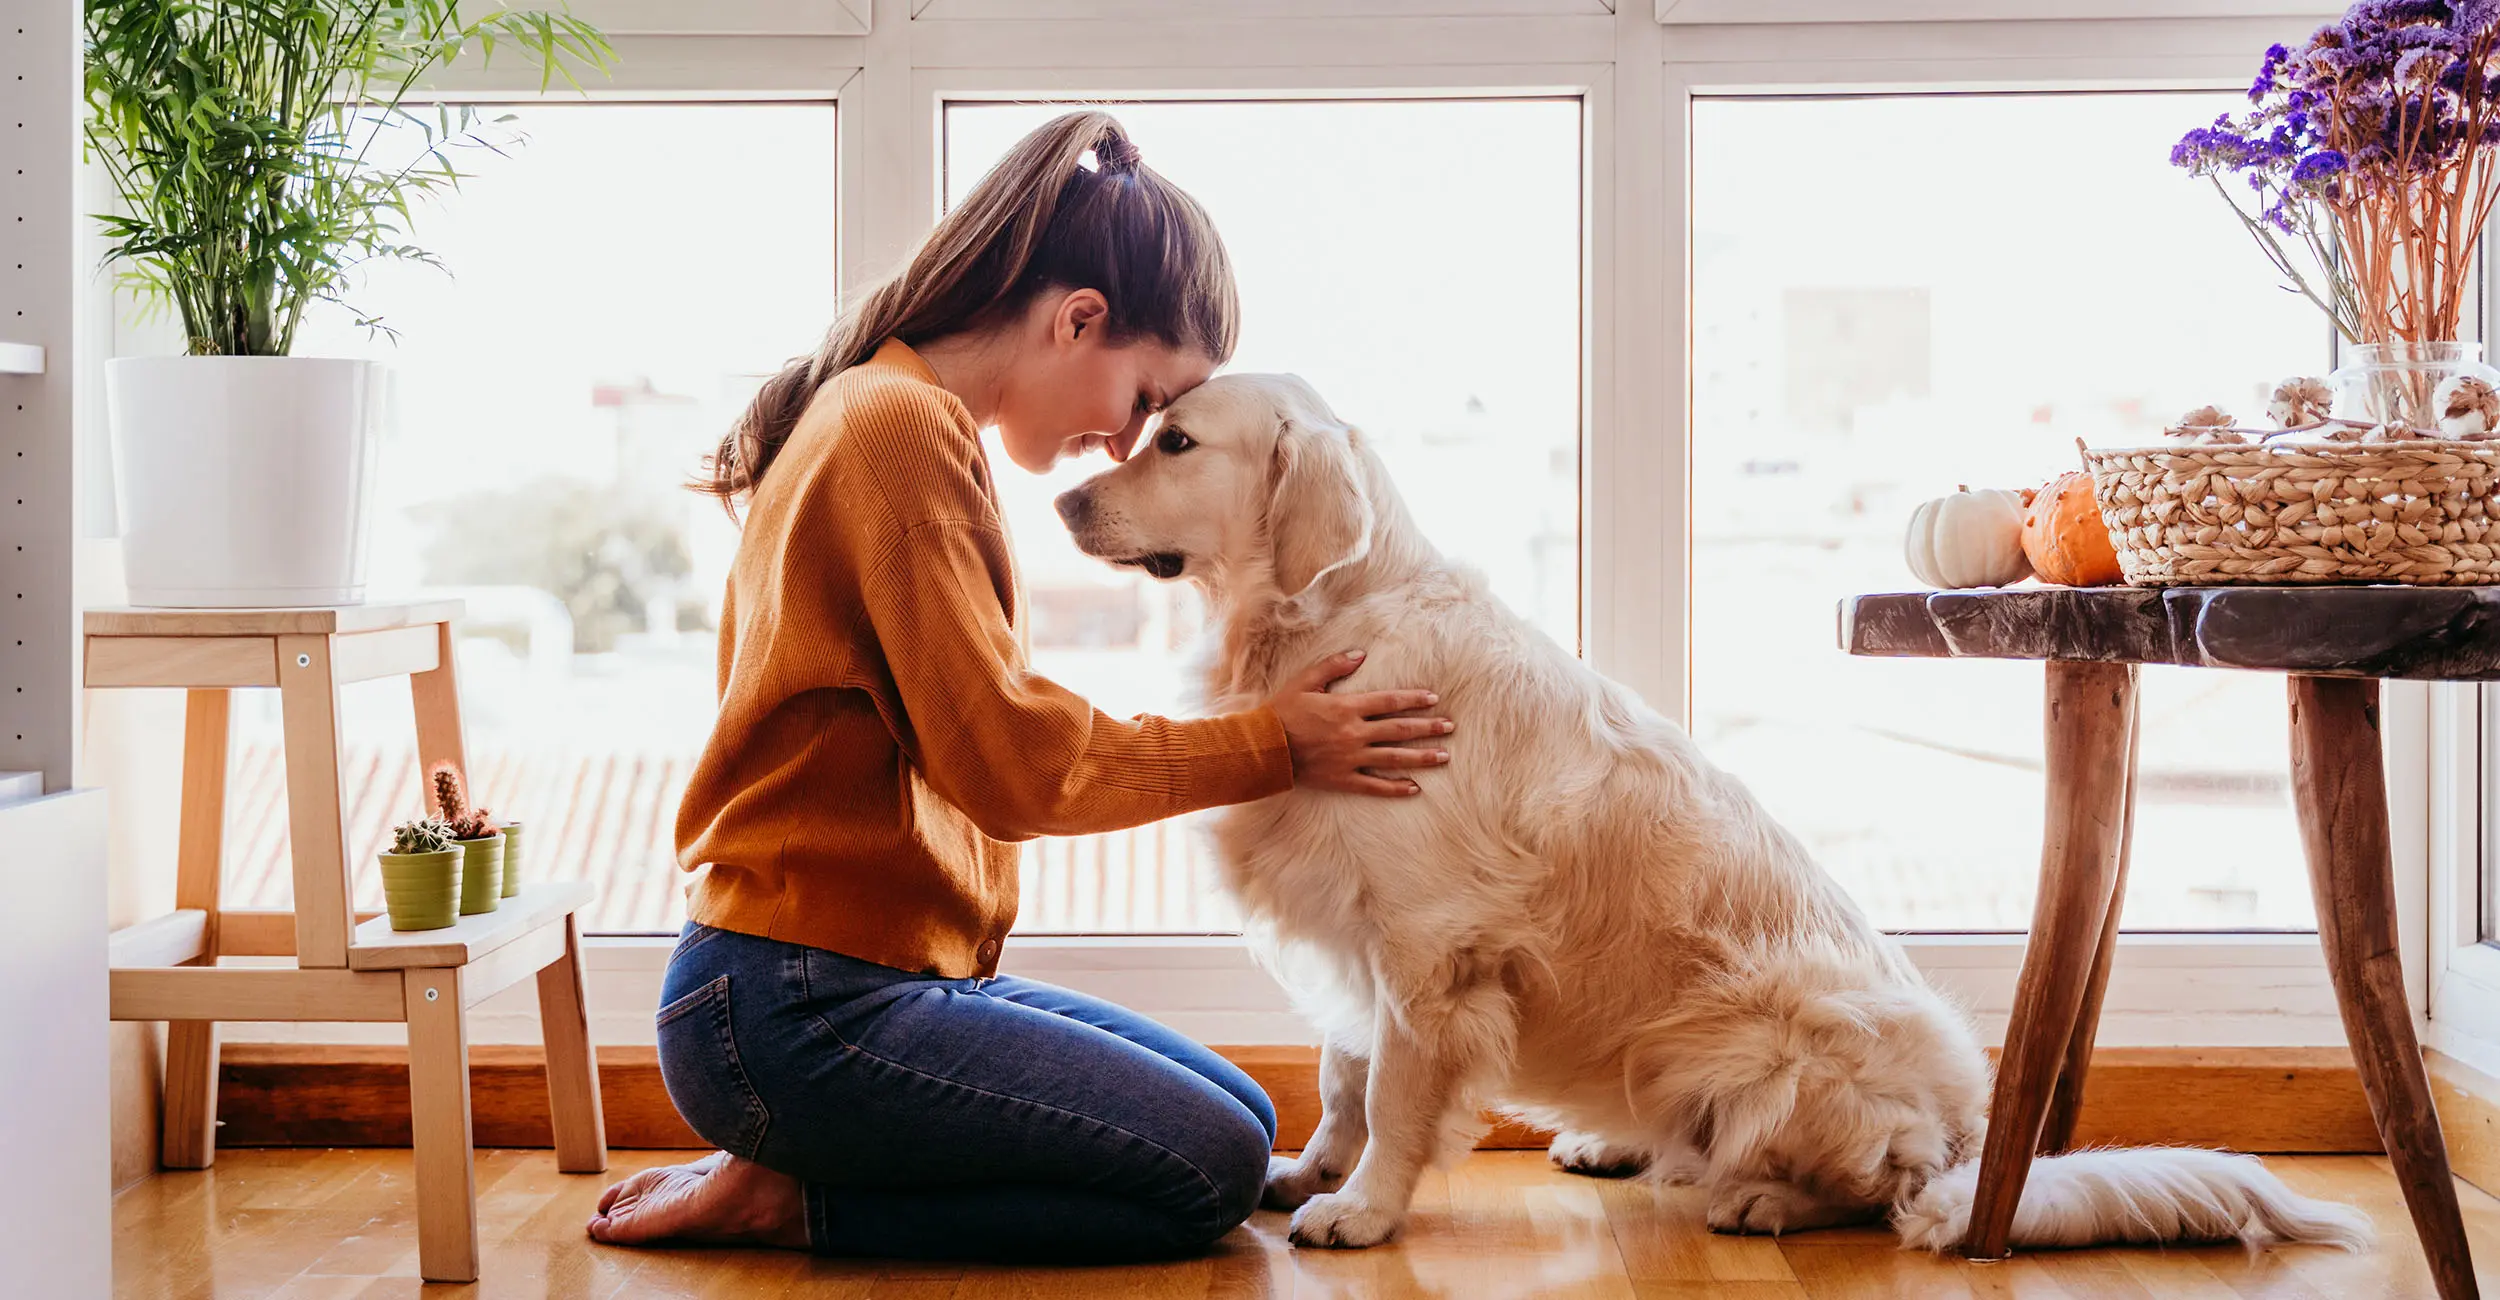 New to Dog Parenting? Here's Our Advice!